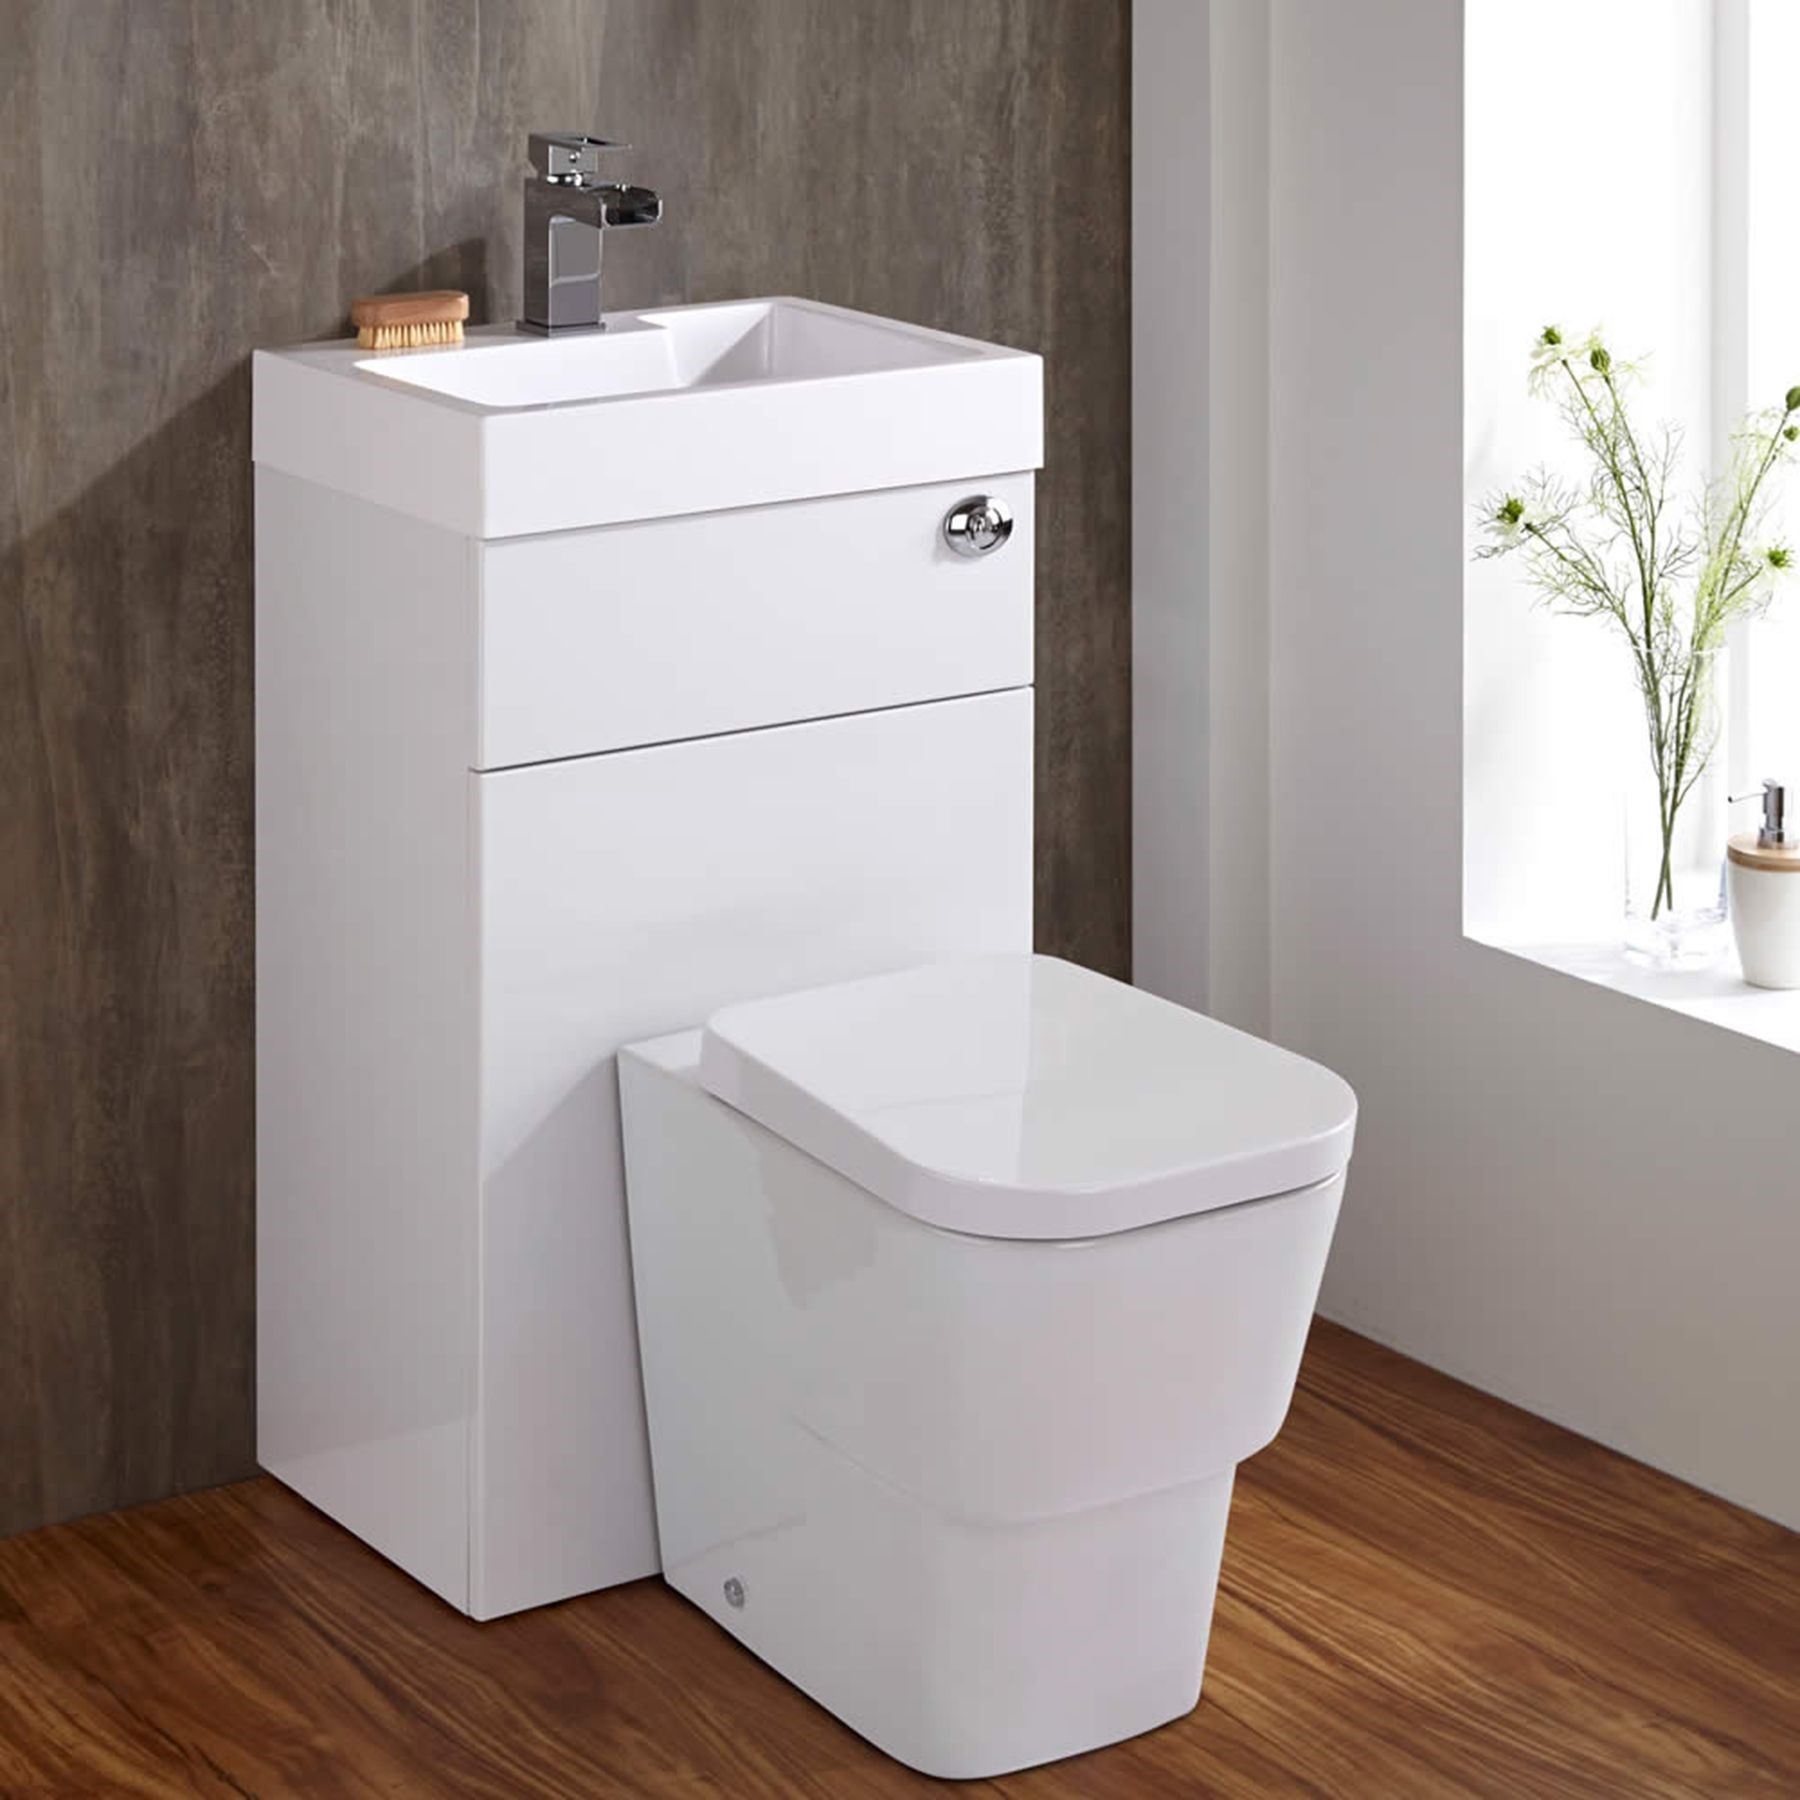 Installation tips for back to wall close coupled toilet in bathroom Erin Magazine